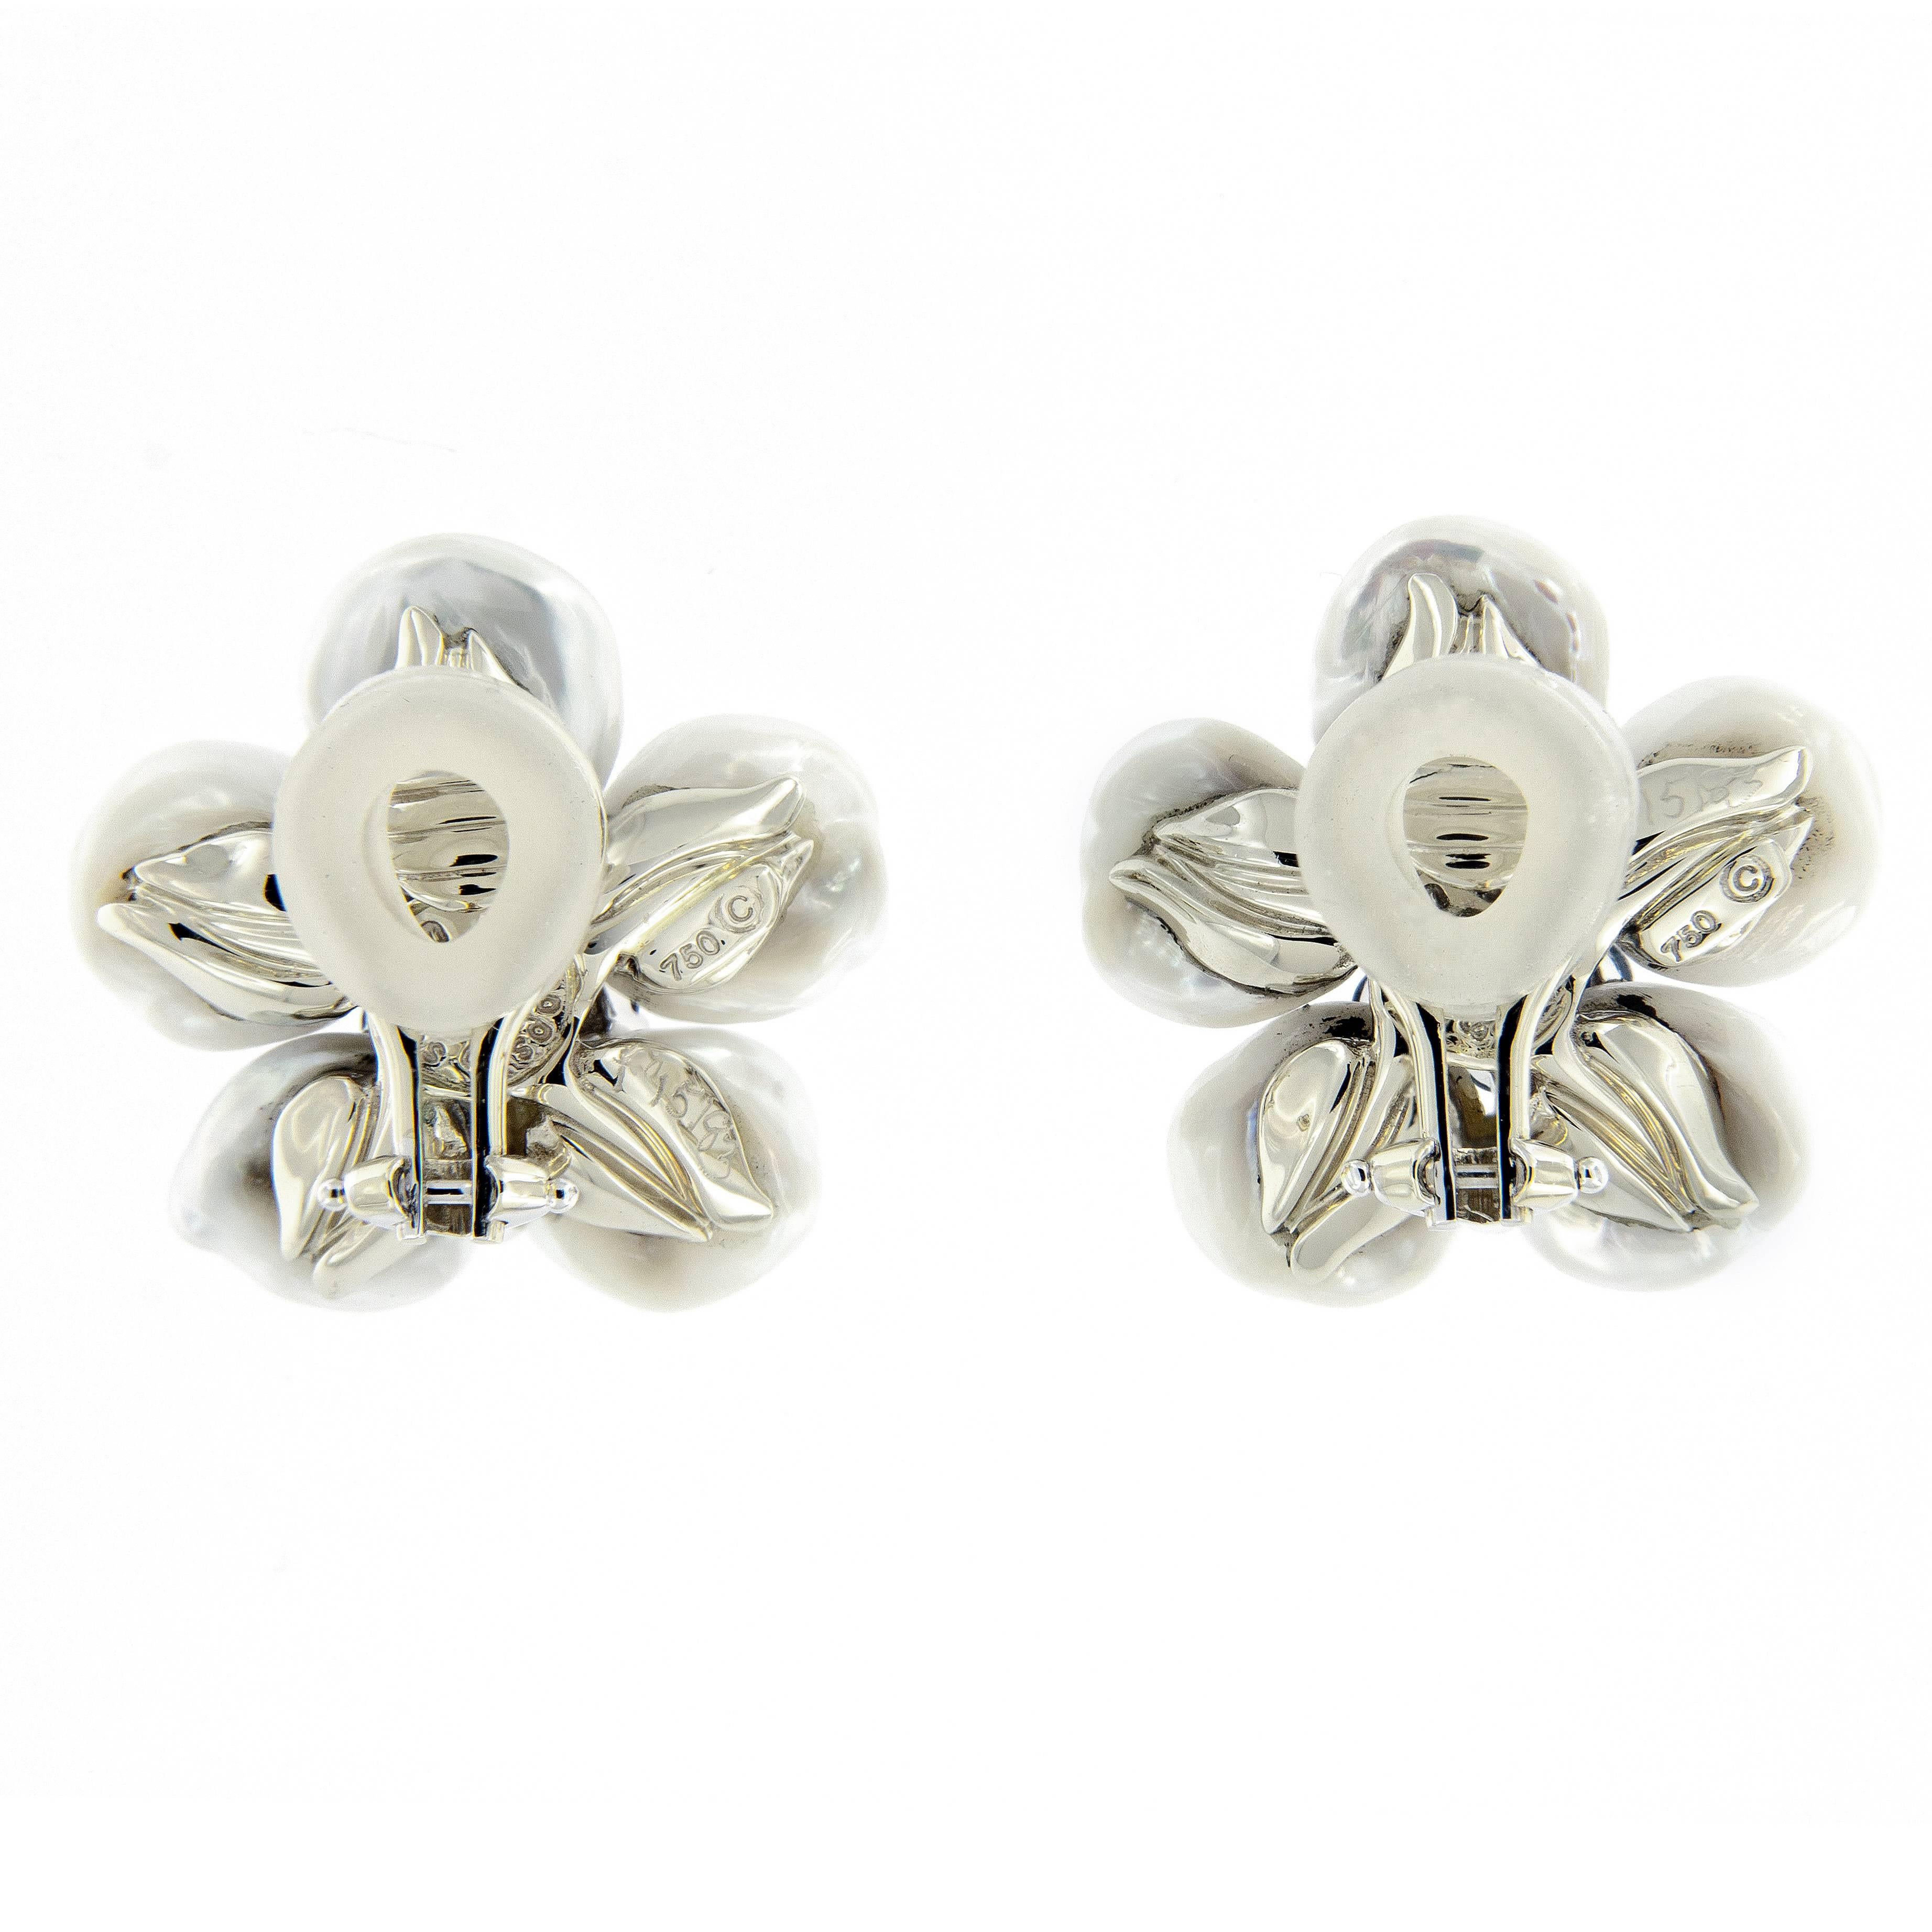 Earrings with freshwater pearl petals and blue sapphire cluster centers create the “Biwa Flower” design. Earrings are 18k white gold with clip backs. Designed by Seaman Schepps. Weigh 12.8 grams.

Sapphire 1.30 cttw